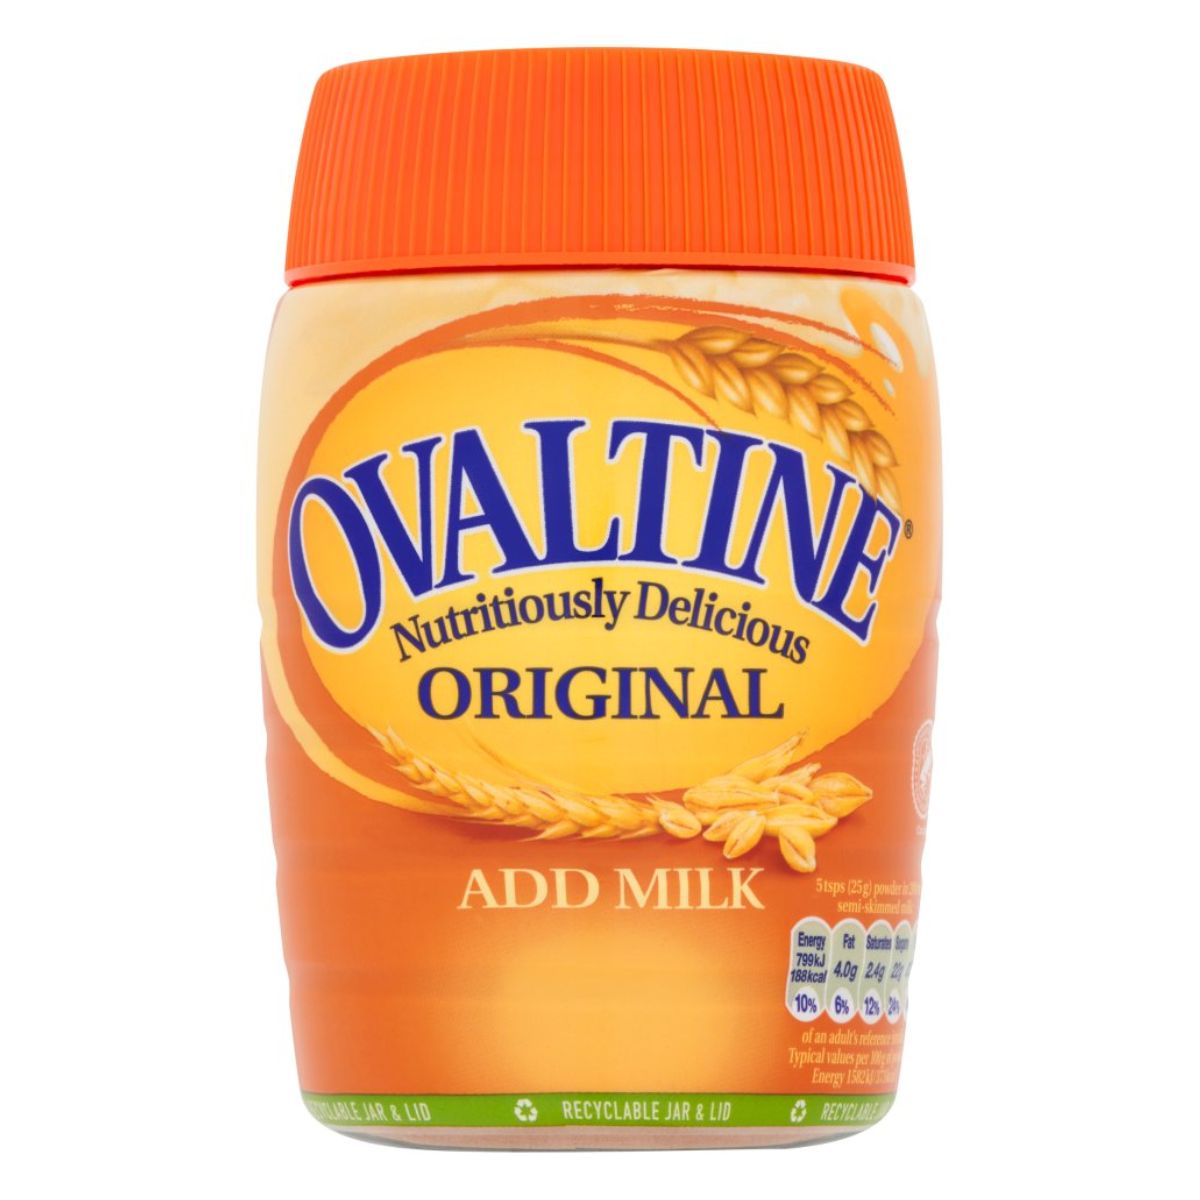 A jar of Ovaltine - Original - 300g, with the text "add milk" on the label, against a white background.